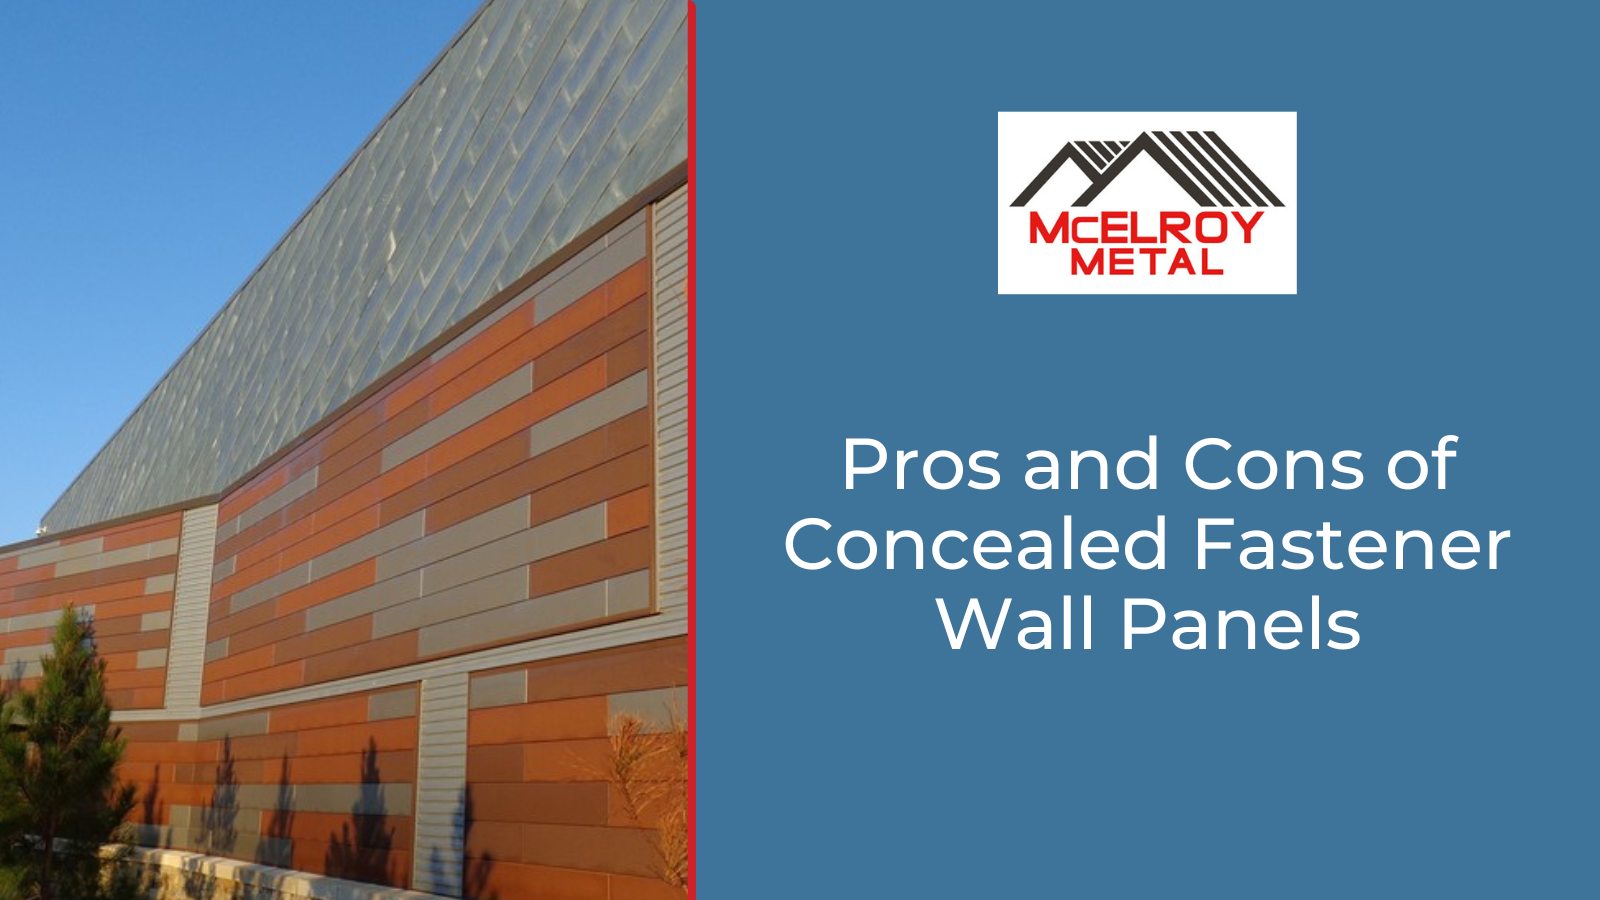 Pros and Cons of Concealed Fastener Wall Panels